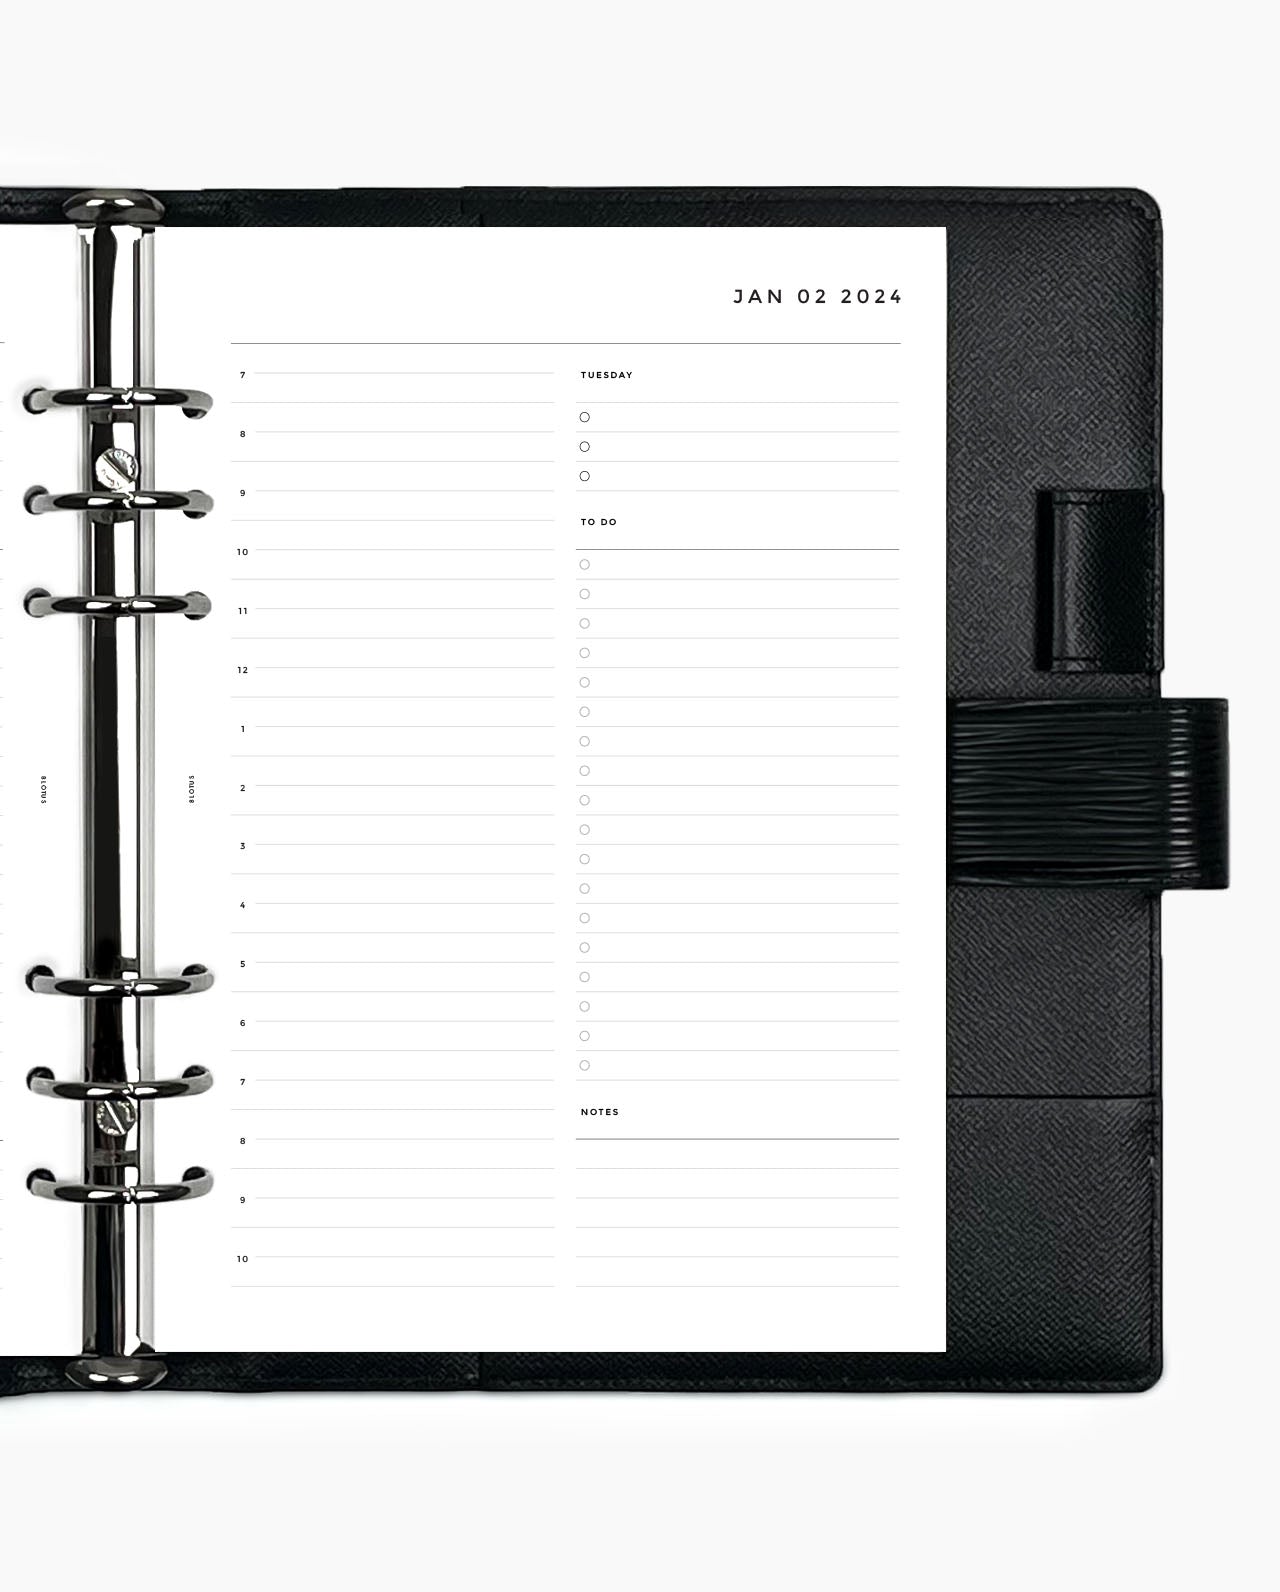 MN076 - 2024 Daily Planner - Half Hour - DO1P